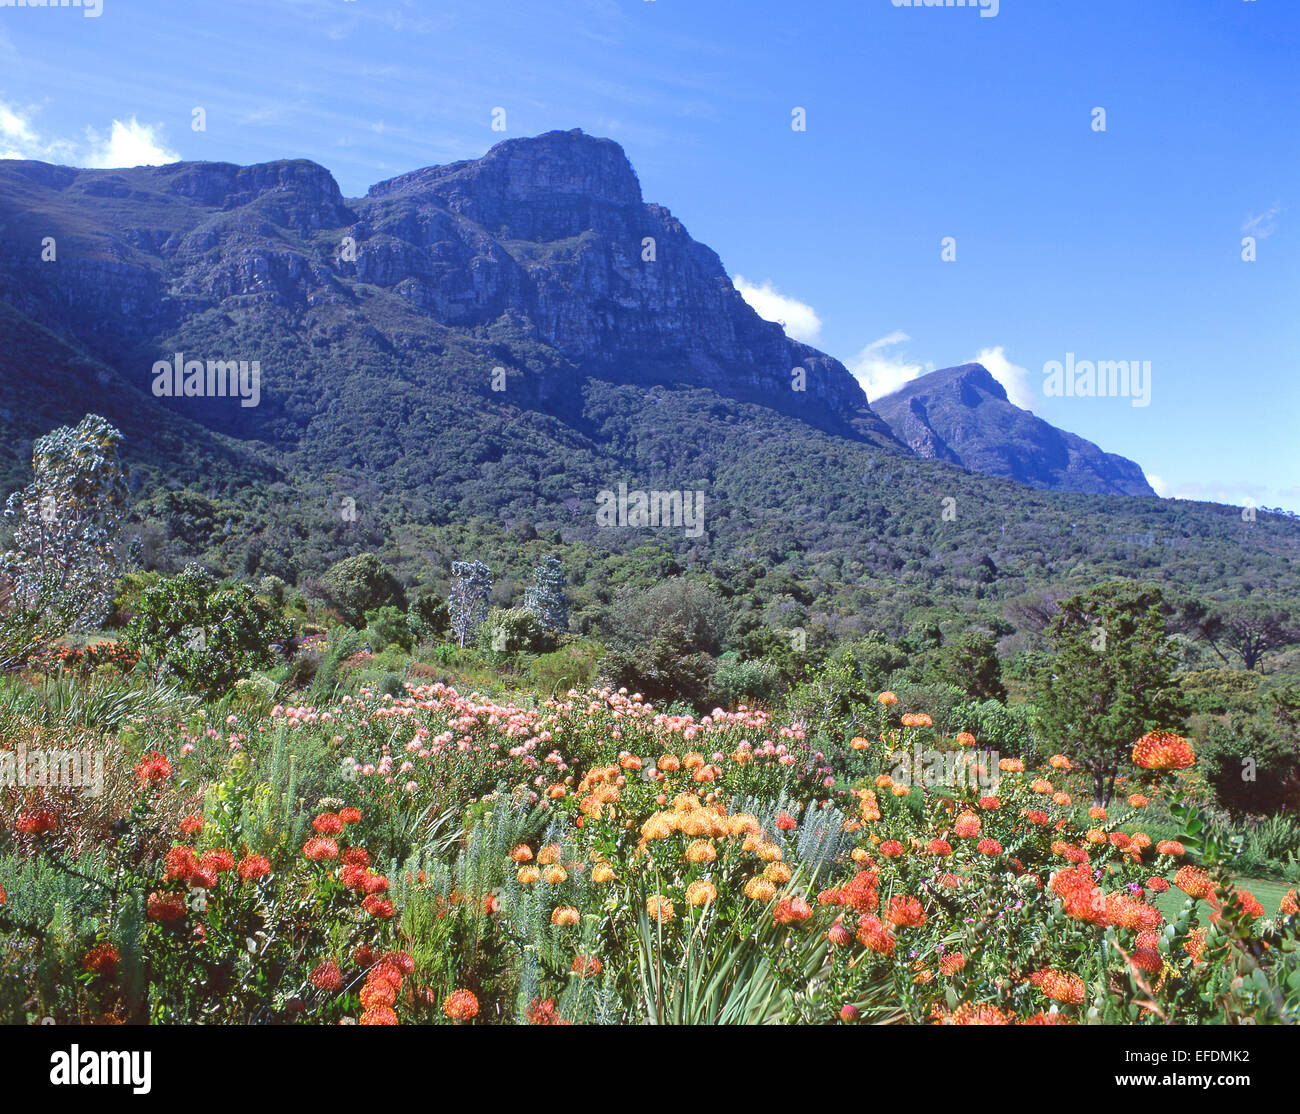 Kirstenbosch National Botanical Garden at foot of Table Mountain, Cape Town, Western Cape Province, Republic of South Africa Stock Photo